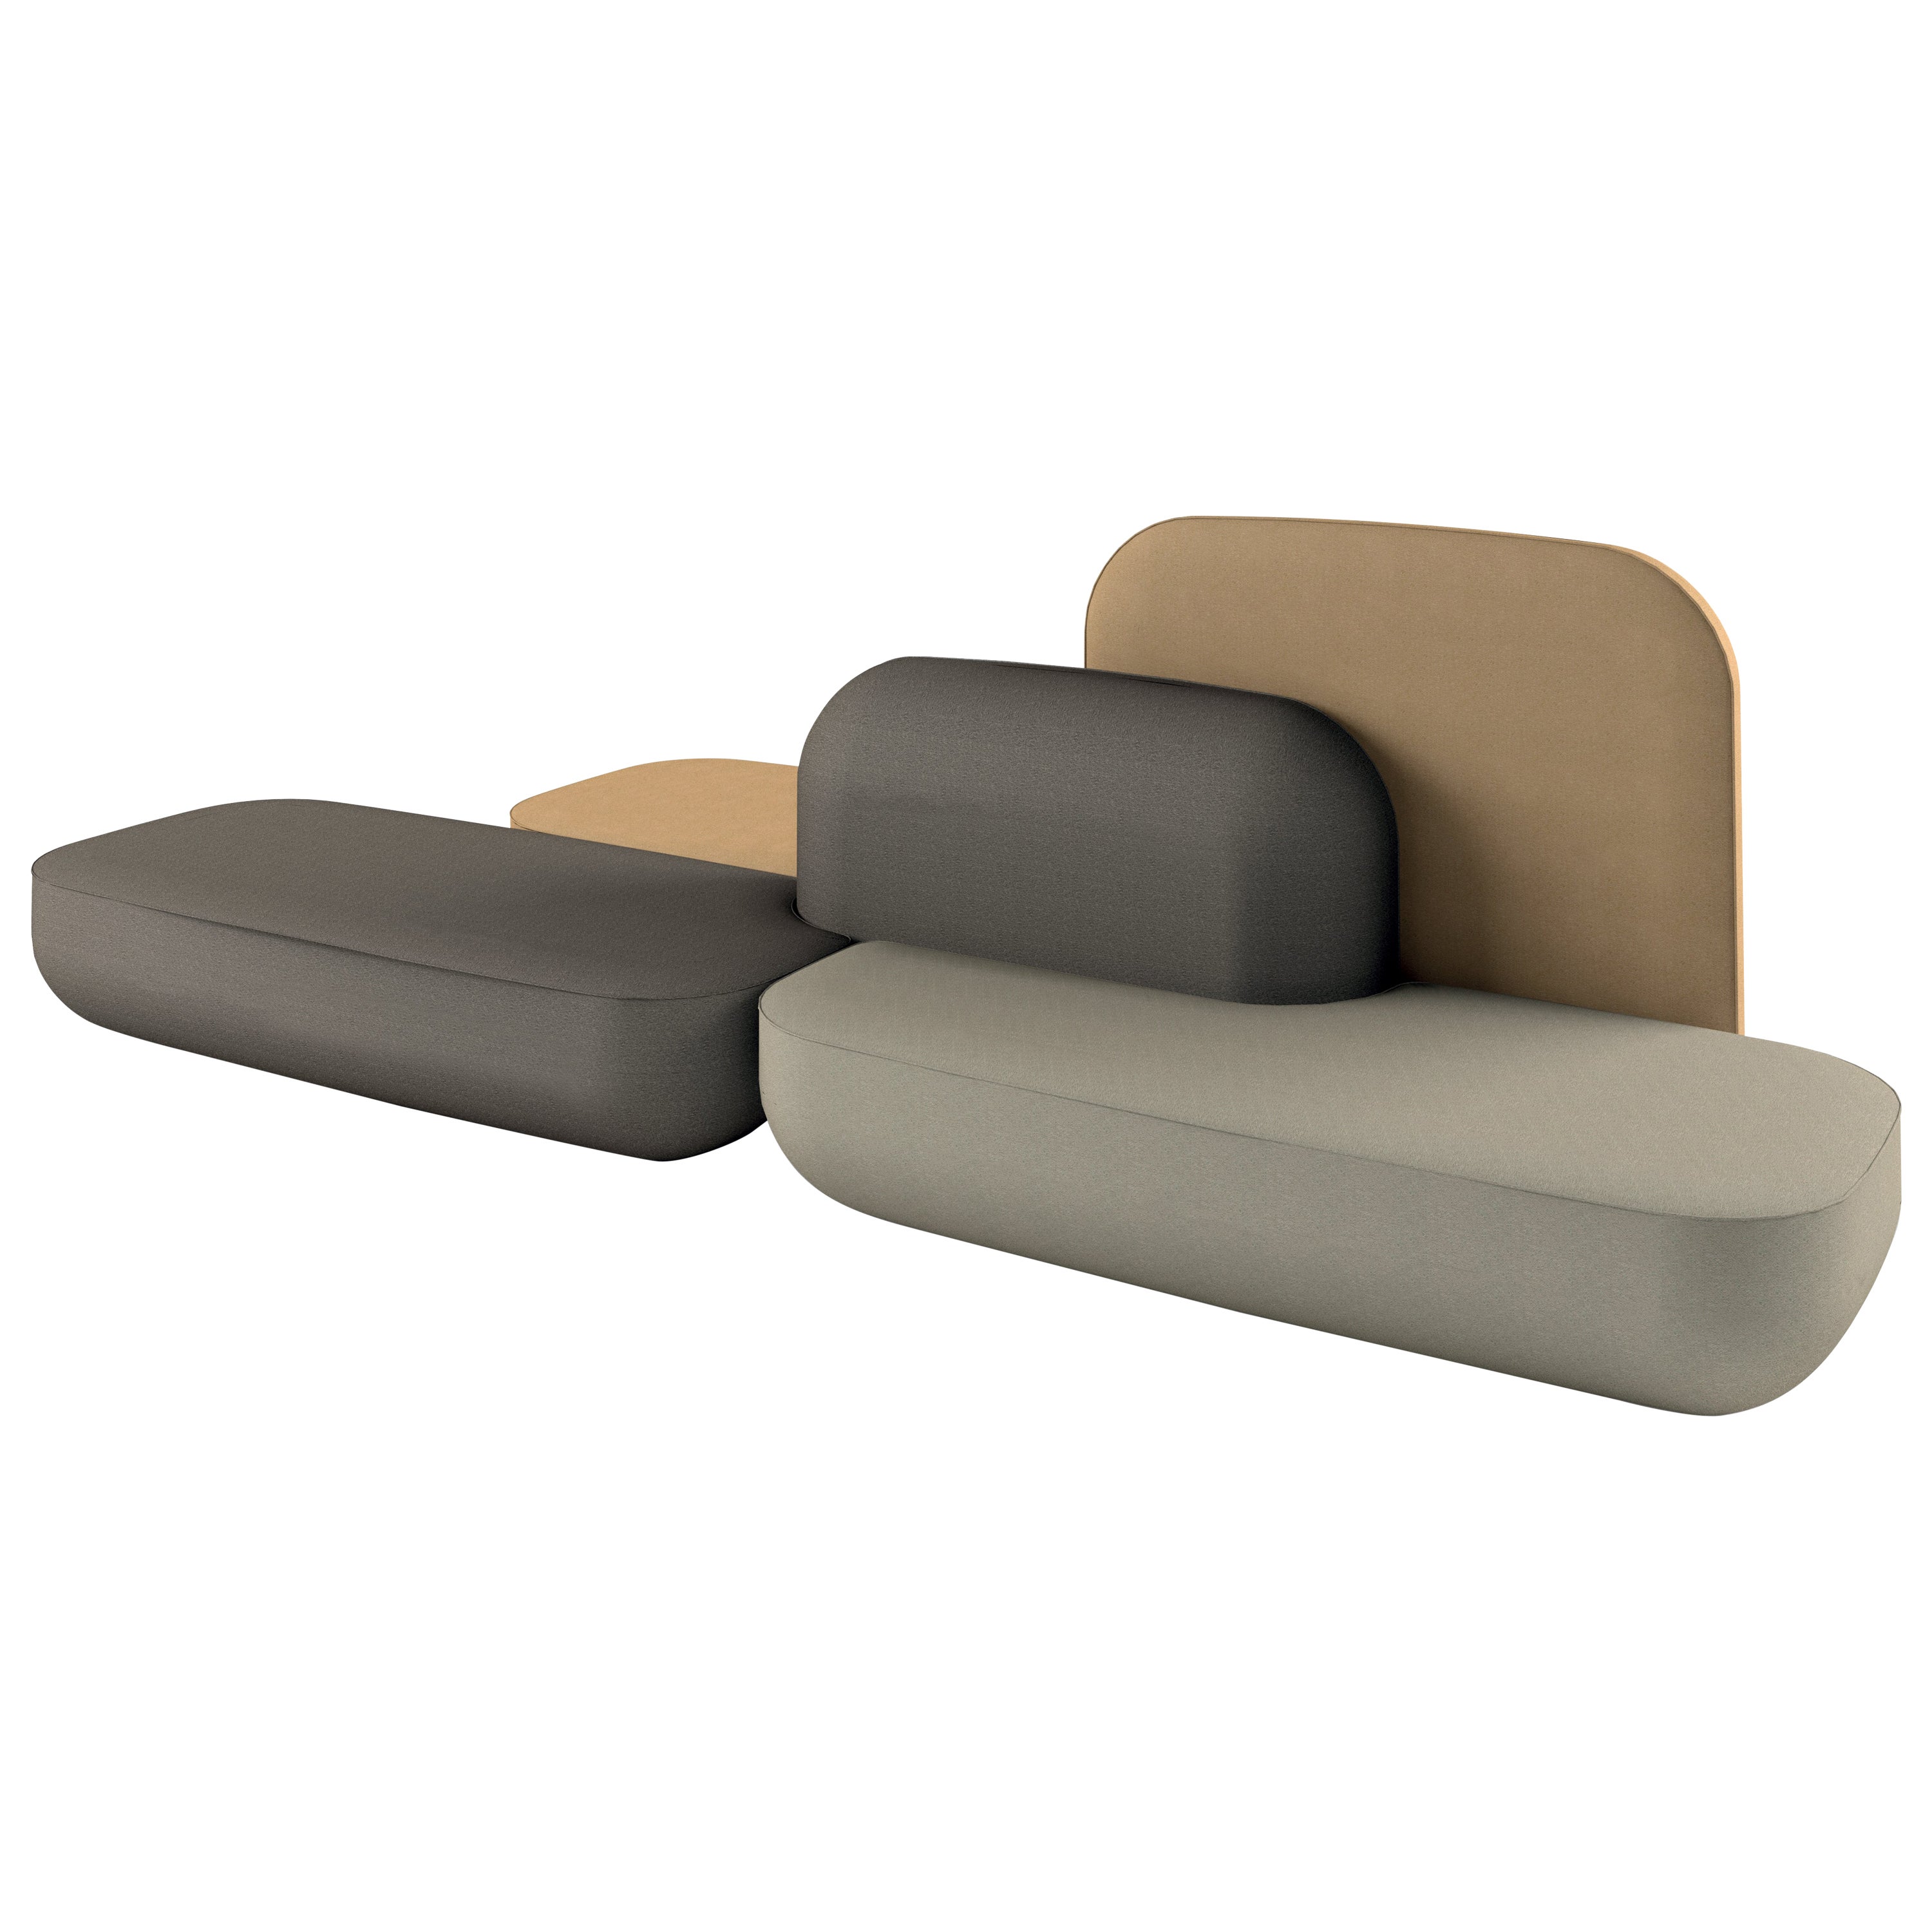 Alias Okome 007 Set of Beige and Grey Upholstered Seats with Backrest by Nendo For Sale